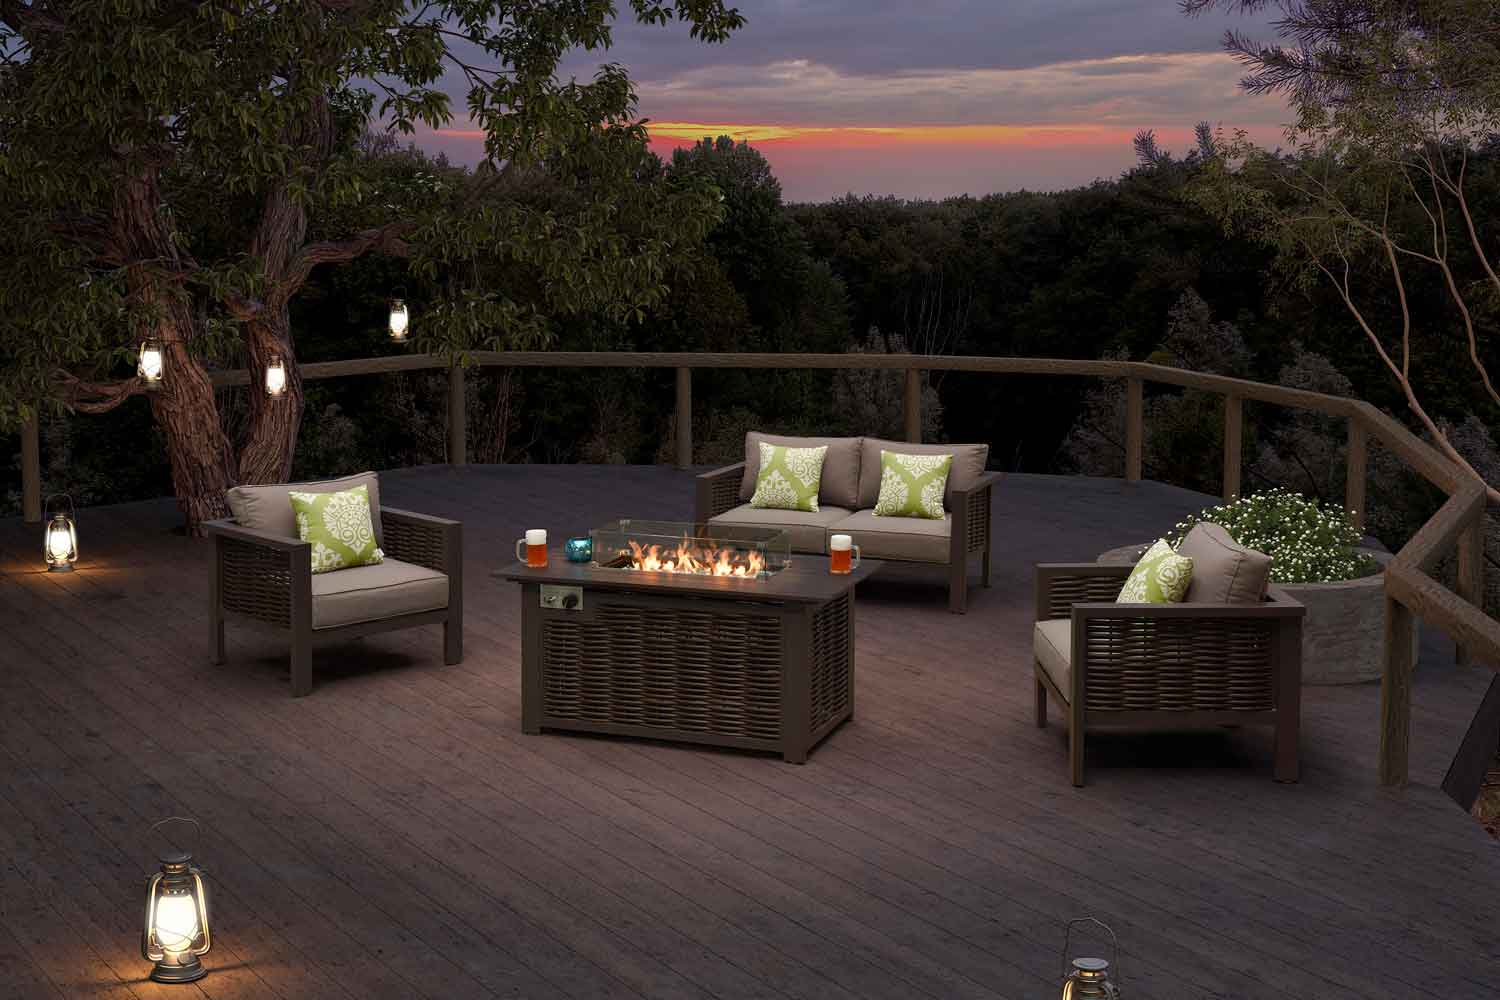 commercial patio furniture